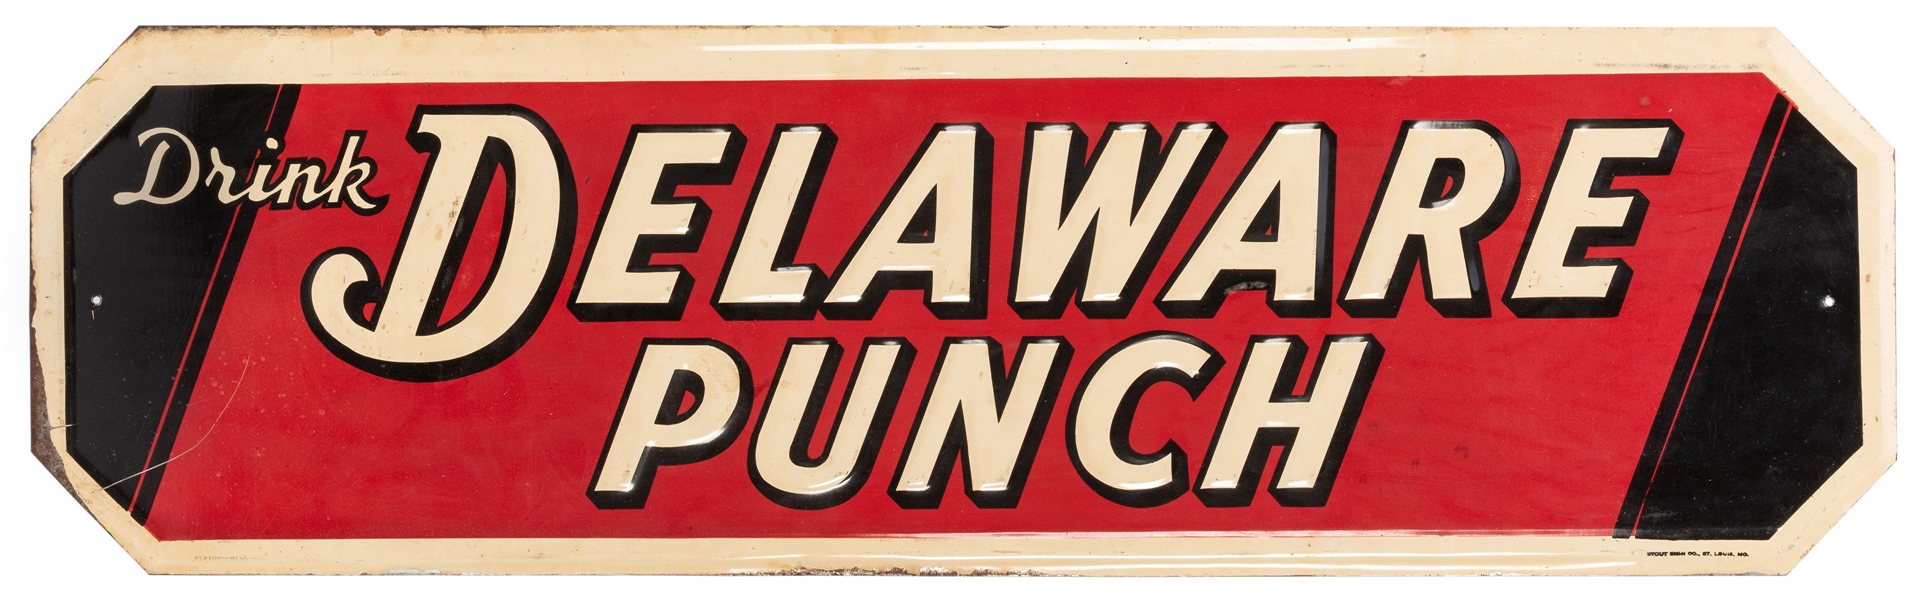  Delaware Punch Sign. Embossed metal advertising sign by Sto...